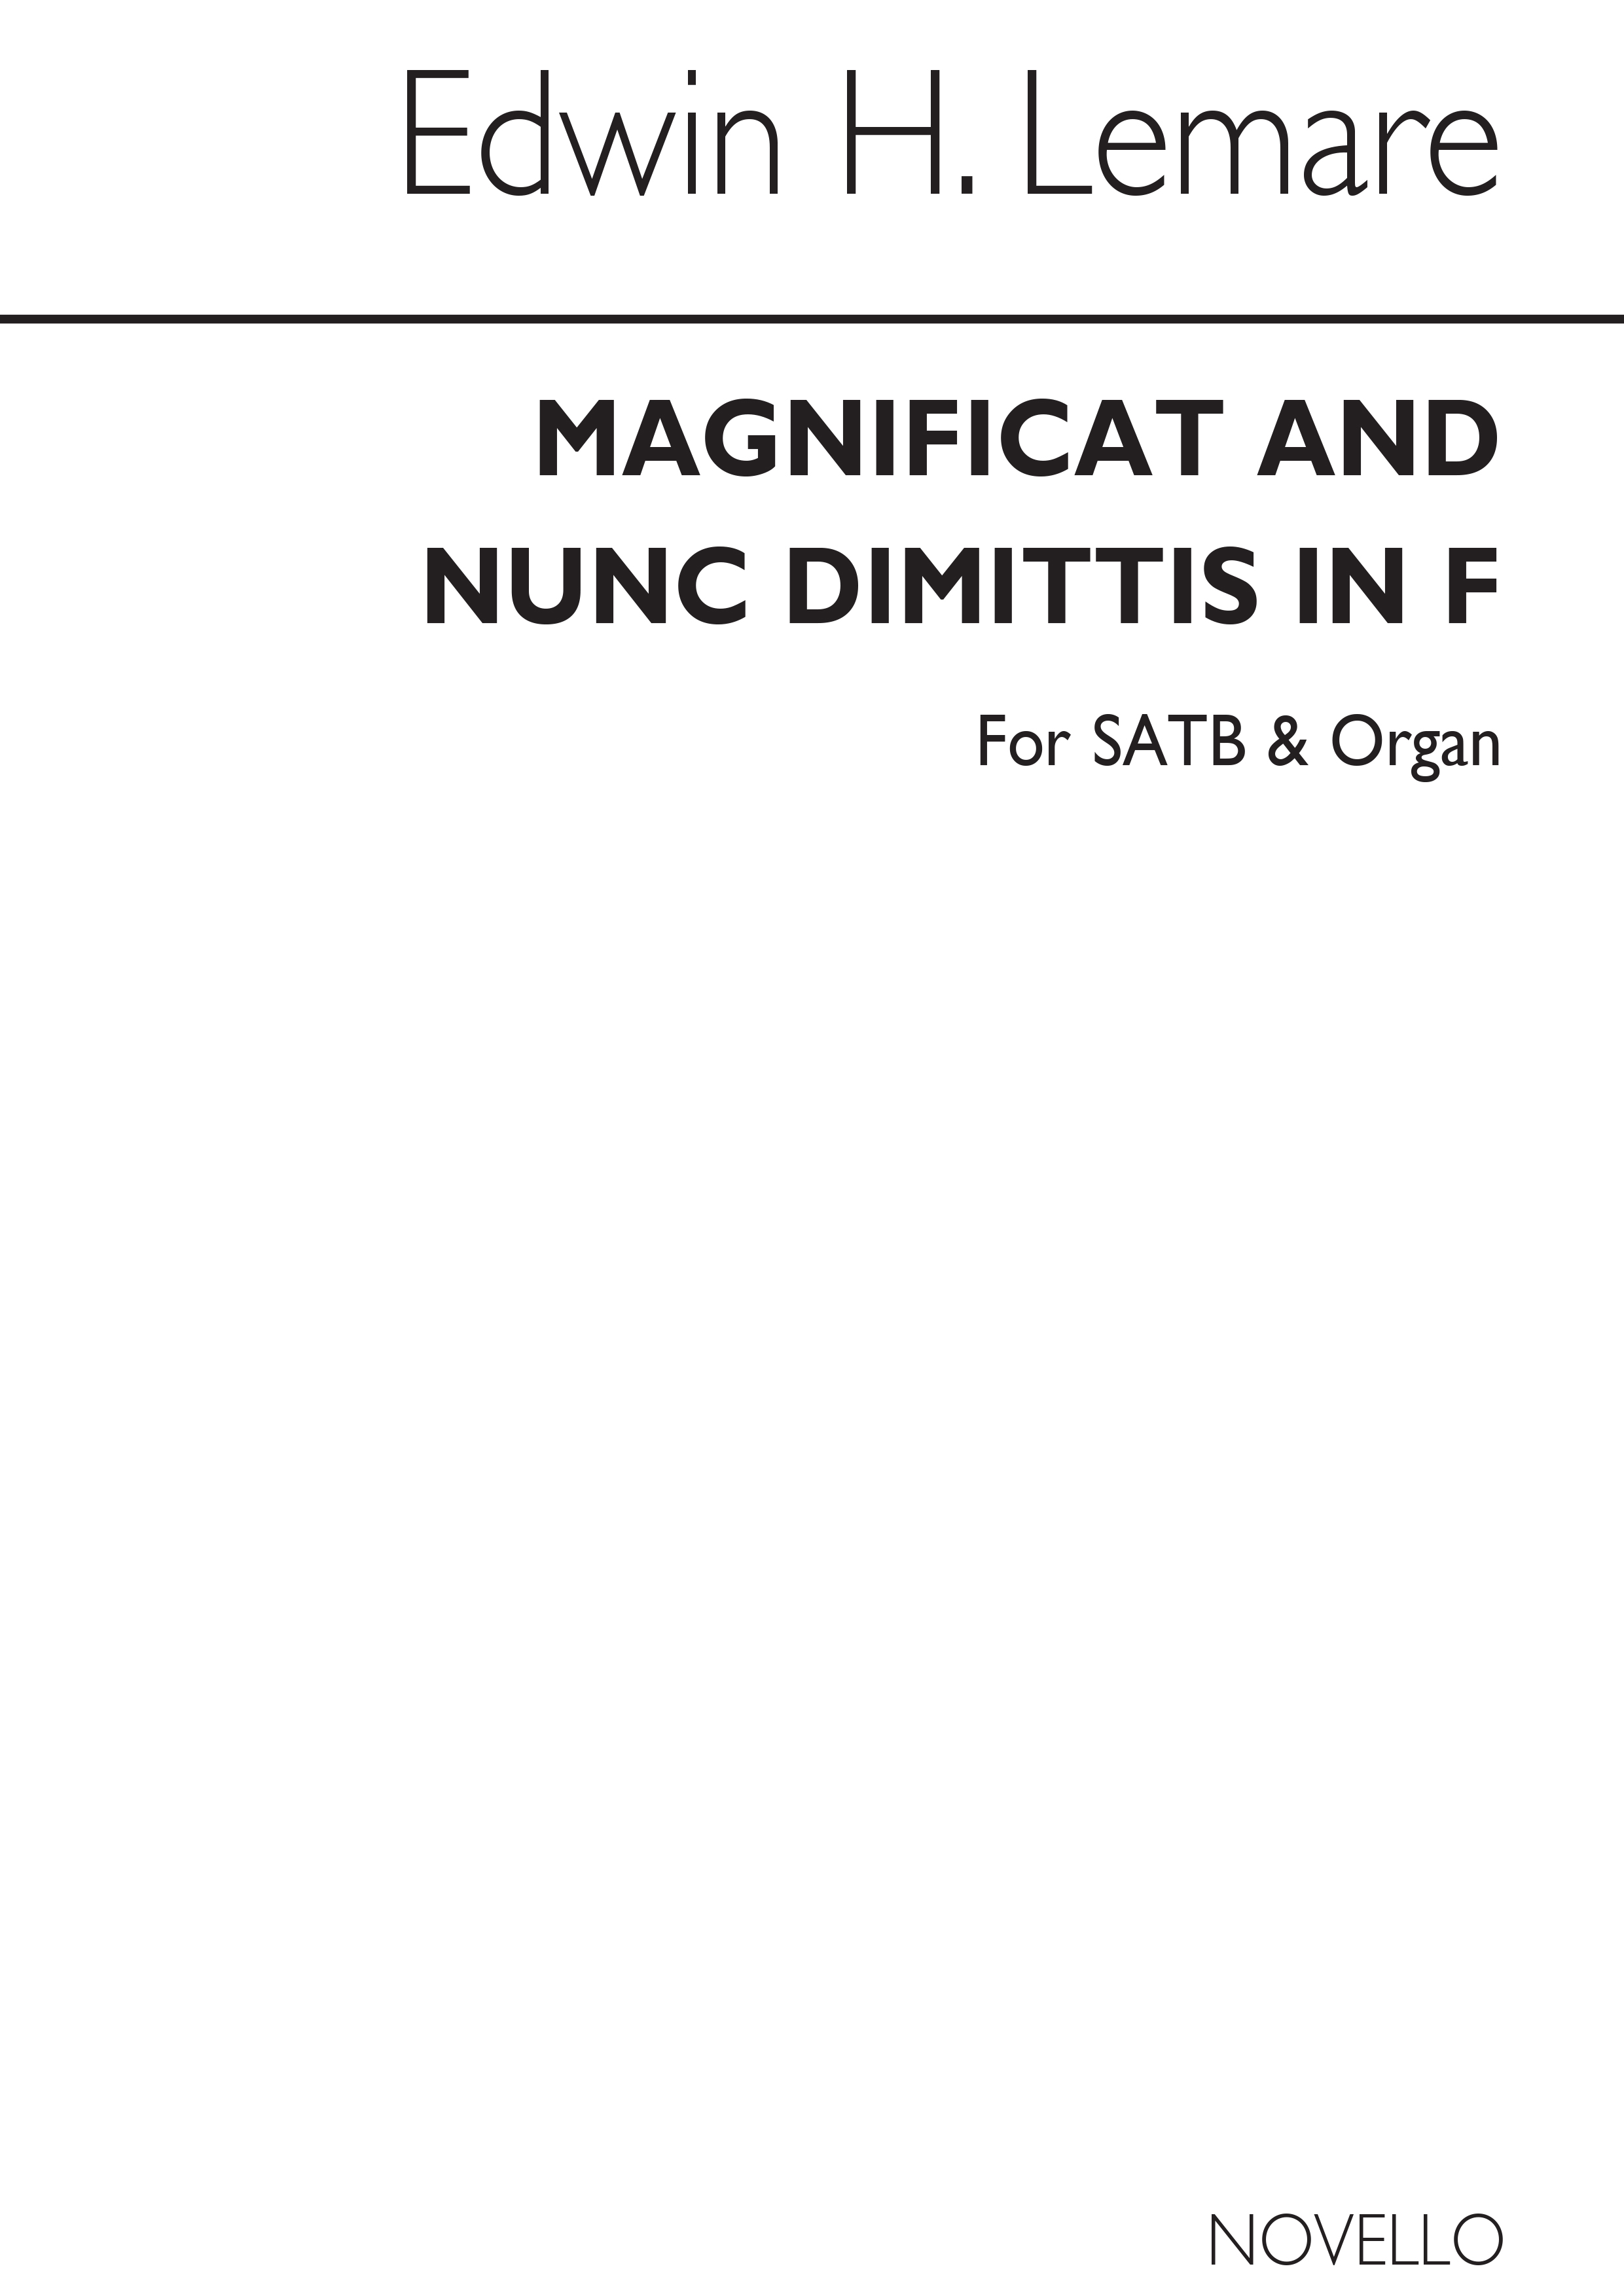 Edwin H. Lemare: Magnificat And Nunc Dimittis In F (Cocks Edition): SATB: Vocal